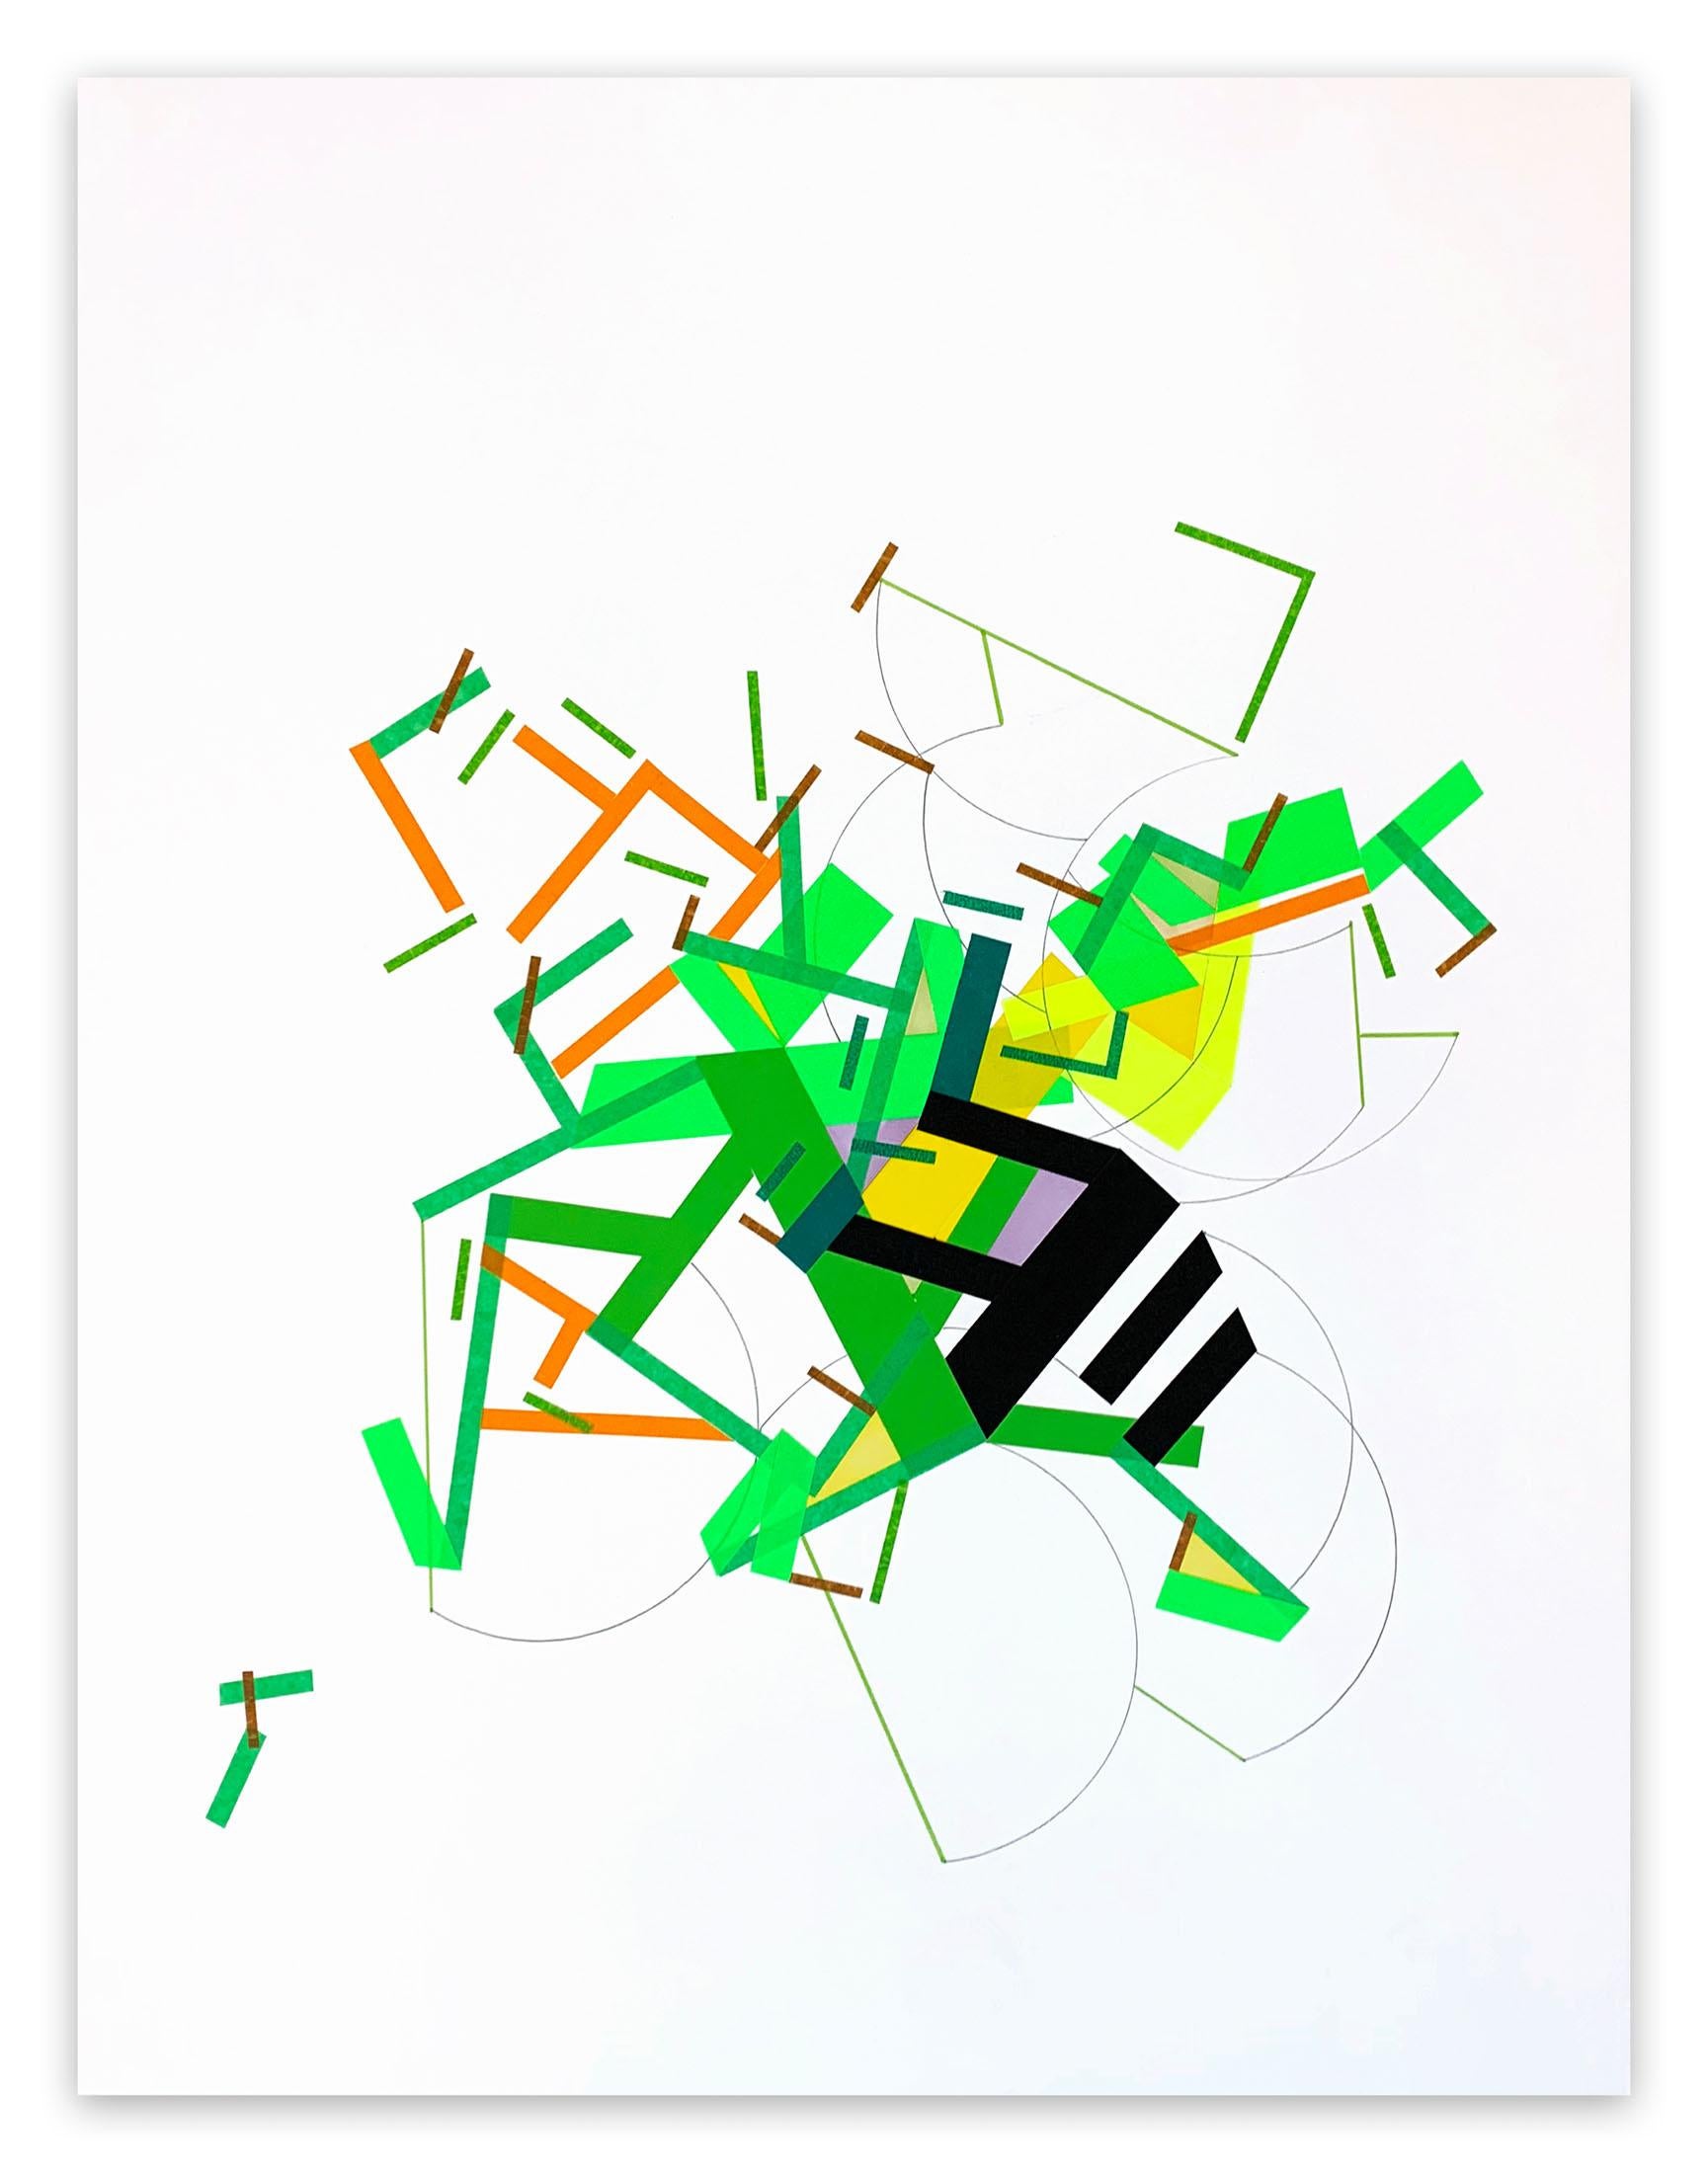 A Fiiane was Ilaand 7 (Abstract painting)

Color tape on paper - Unframed

Philippe Halaburda is a French artist who has coined the term Geographic Abstraction to describe his work. Through his use of color and lines, Halaburda creates sharp